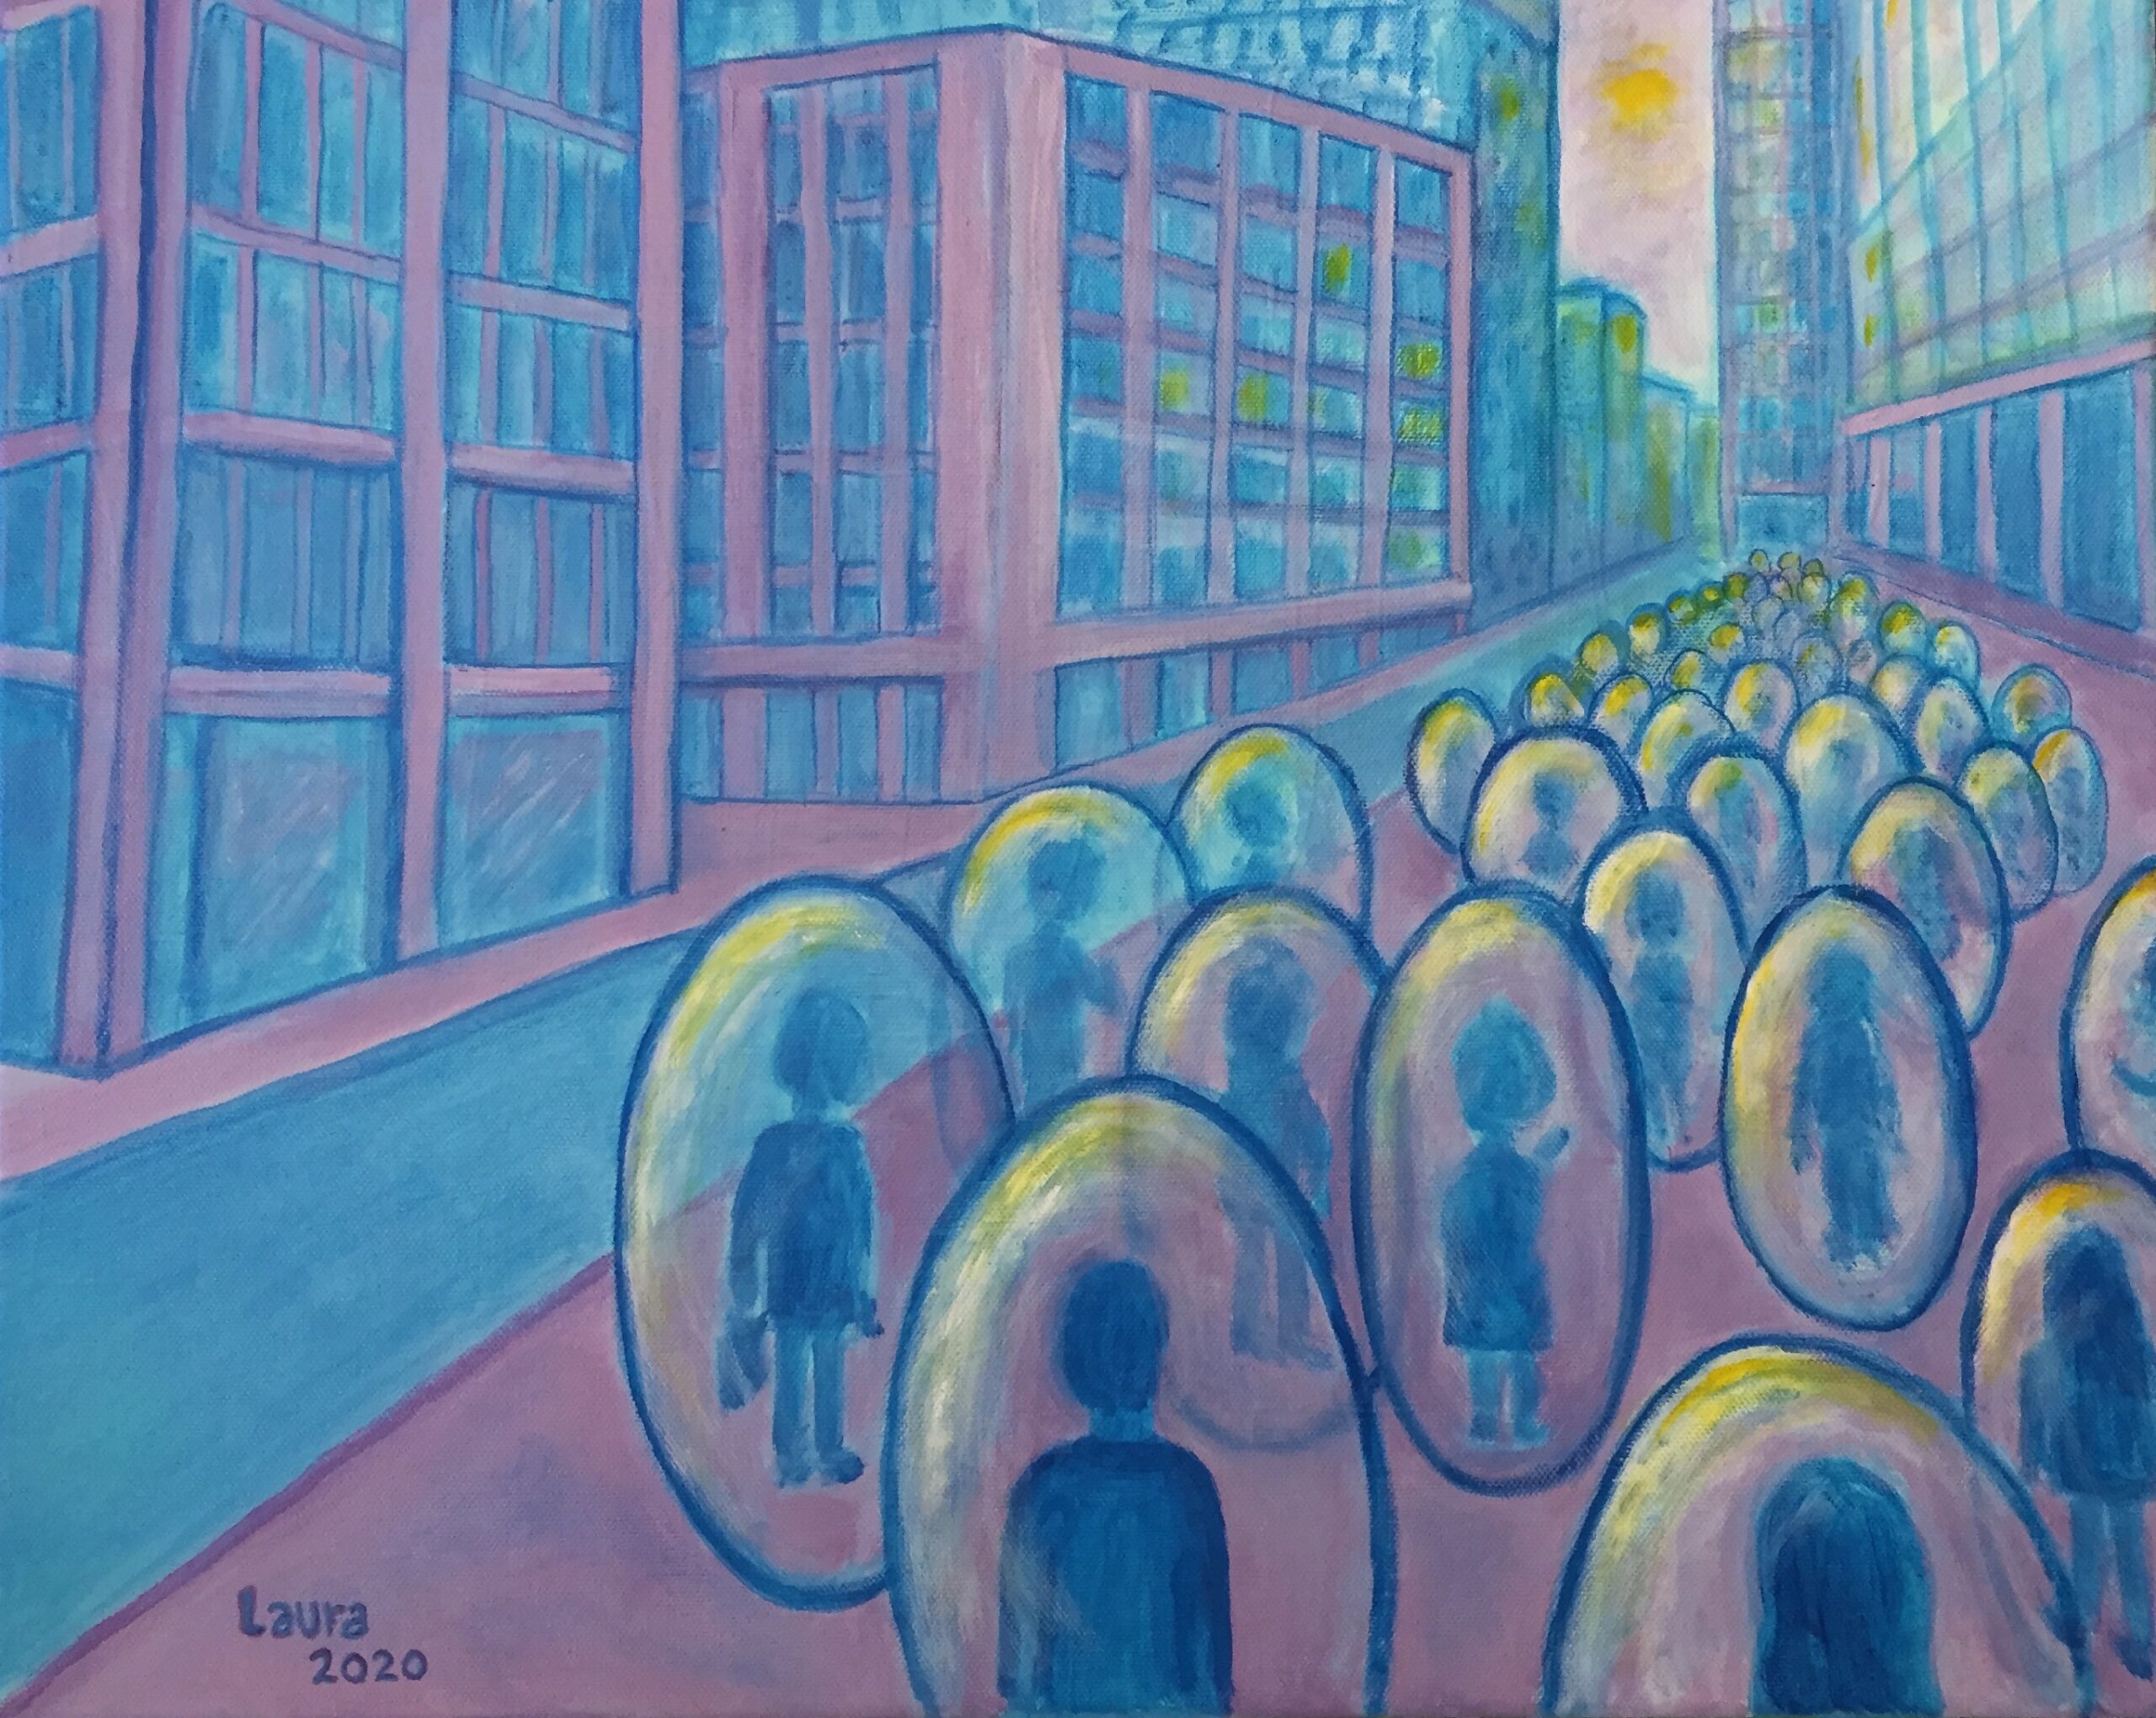 An acrylic painting of vairous shades of blue and pink with tall skyscraper buildings in the background with individuals on a path in clear